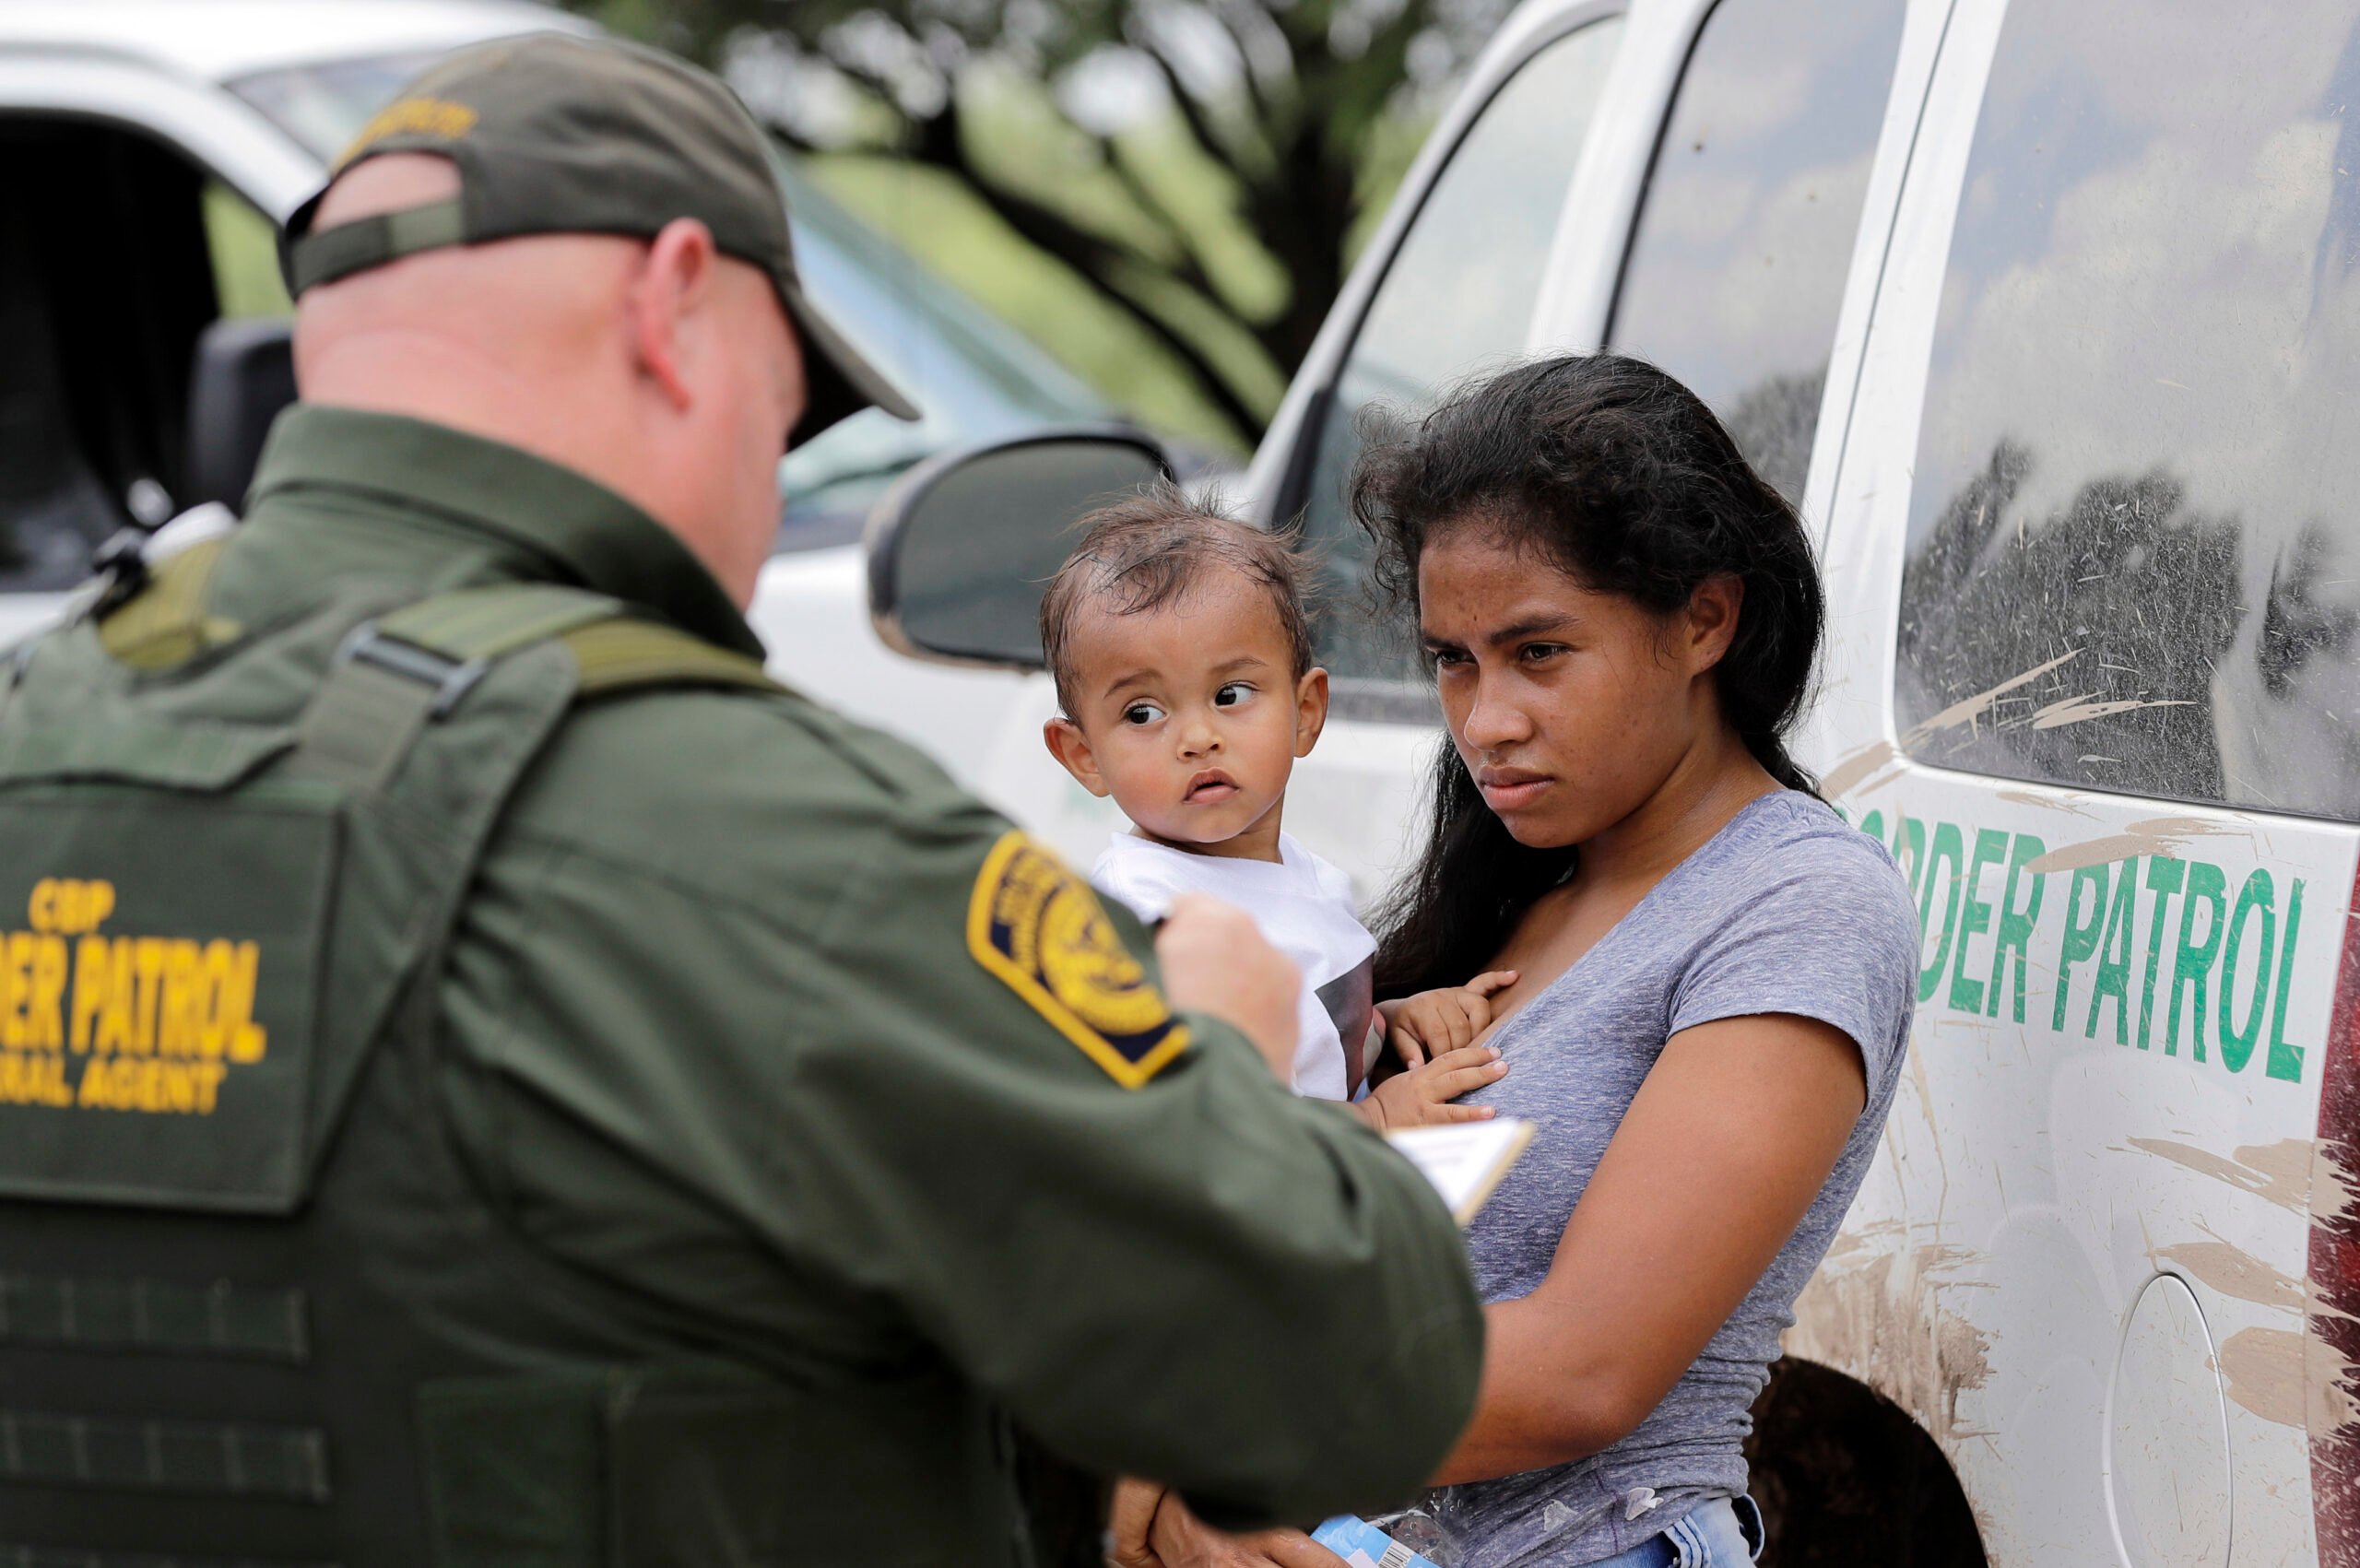 A border patrol officer in a green uniform interviews a Latina migrant holding a baby, while both are standing in front of a U.S. Customs and Border Patrol van.